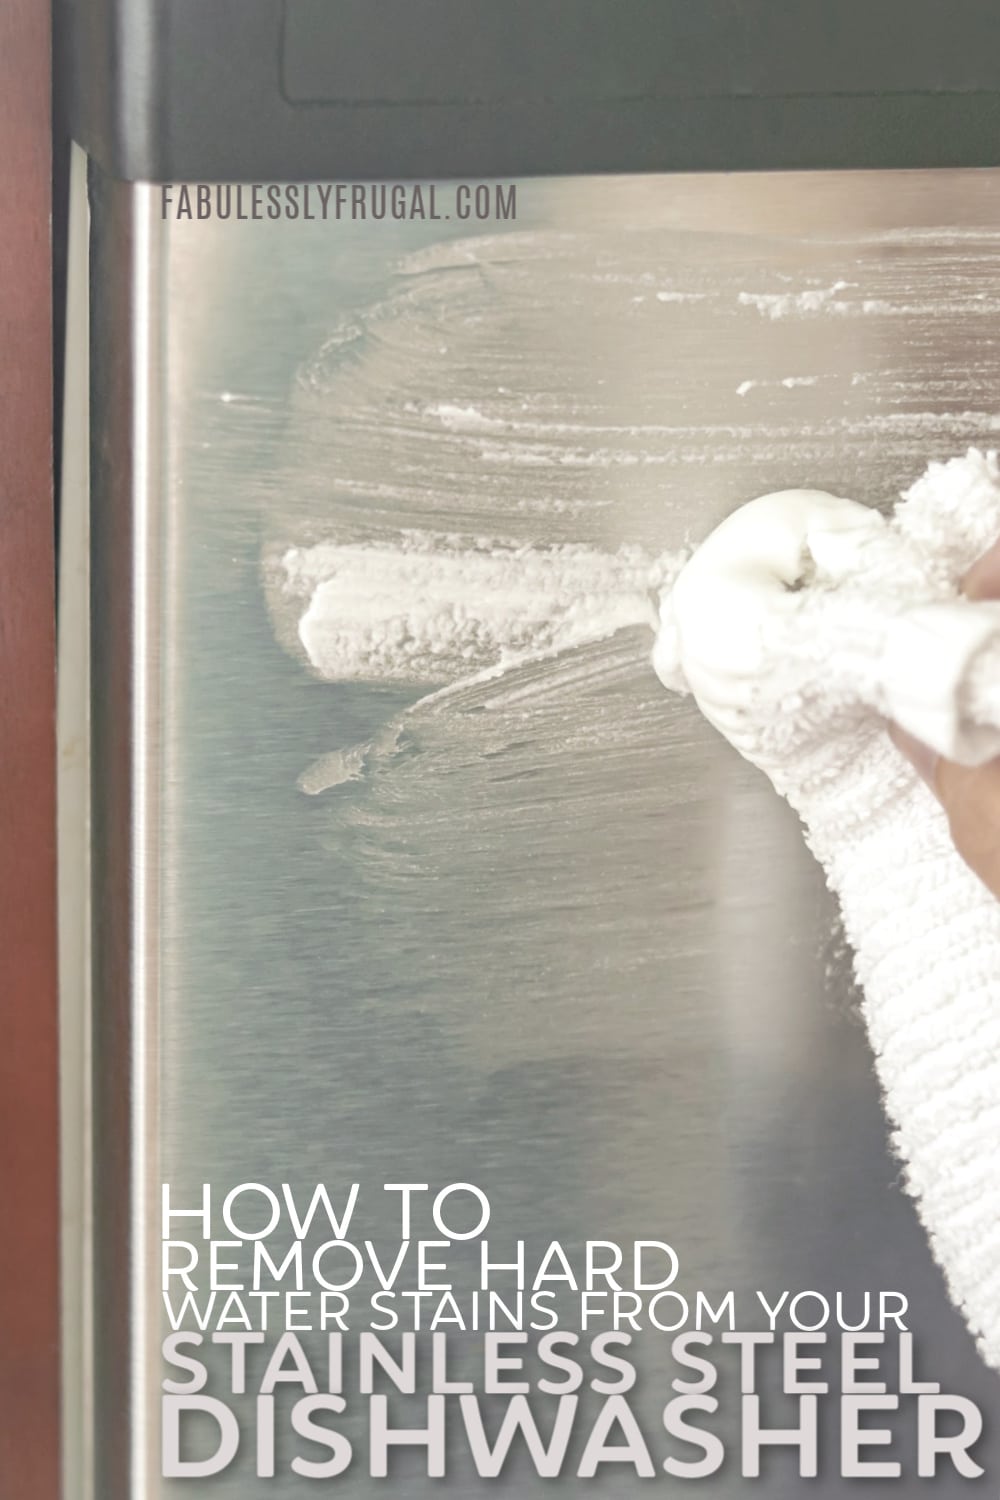 How to remove hard water stains from your stainless steel dishwasher